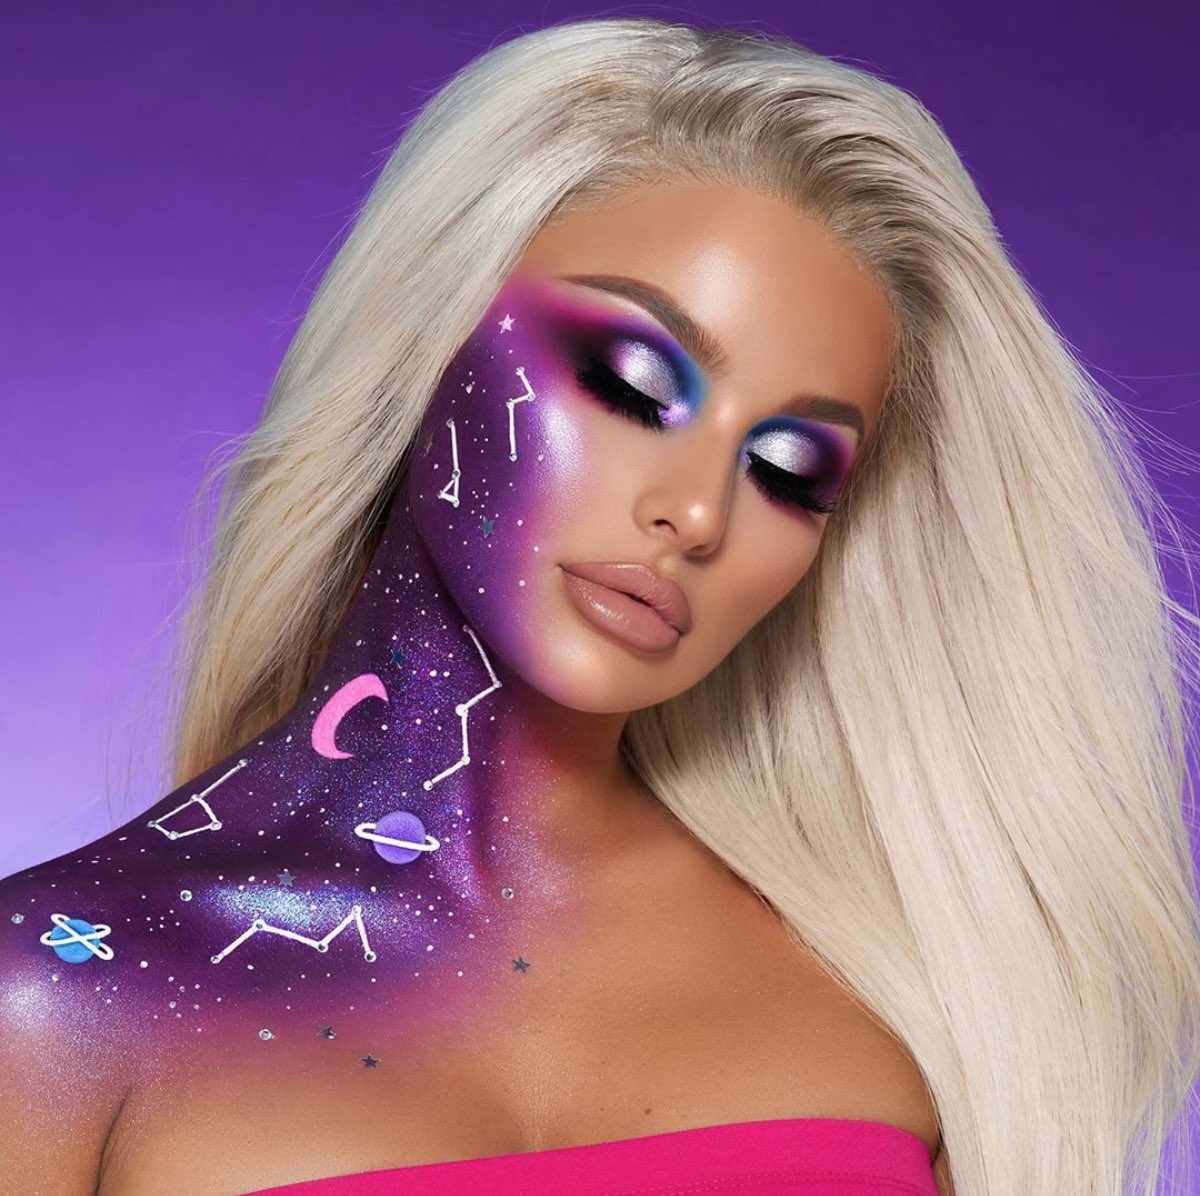 The Space Makeup Trend Taking Over Instagram